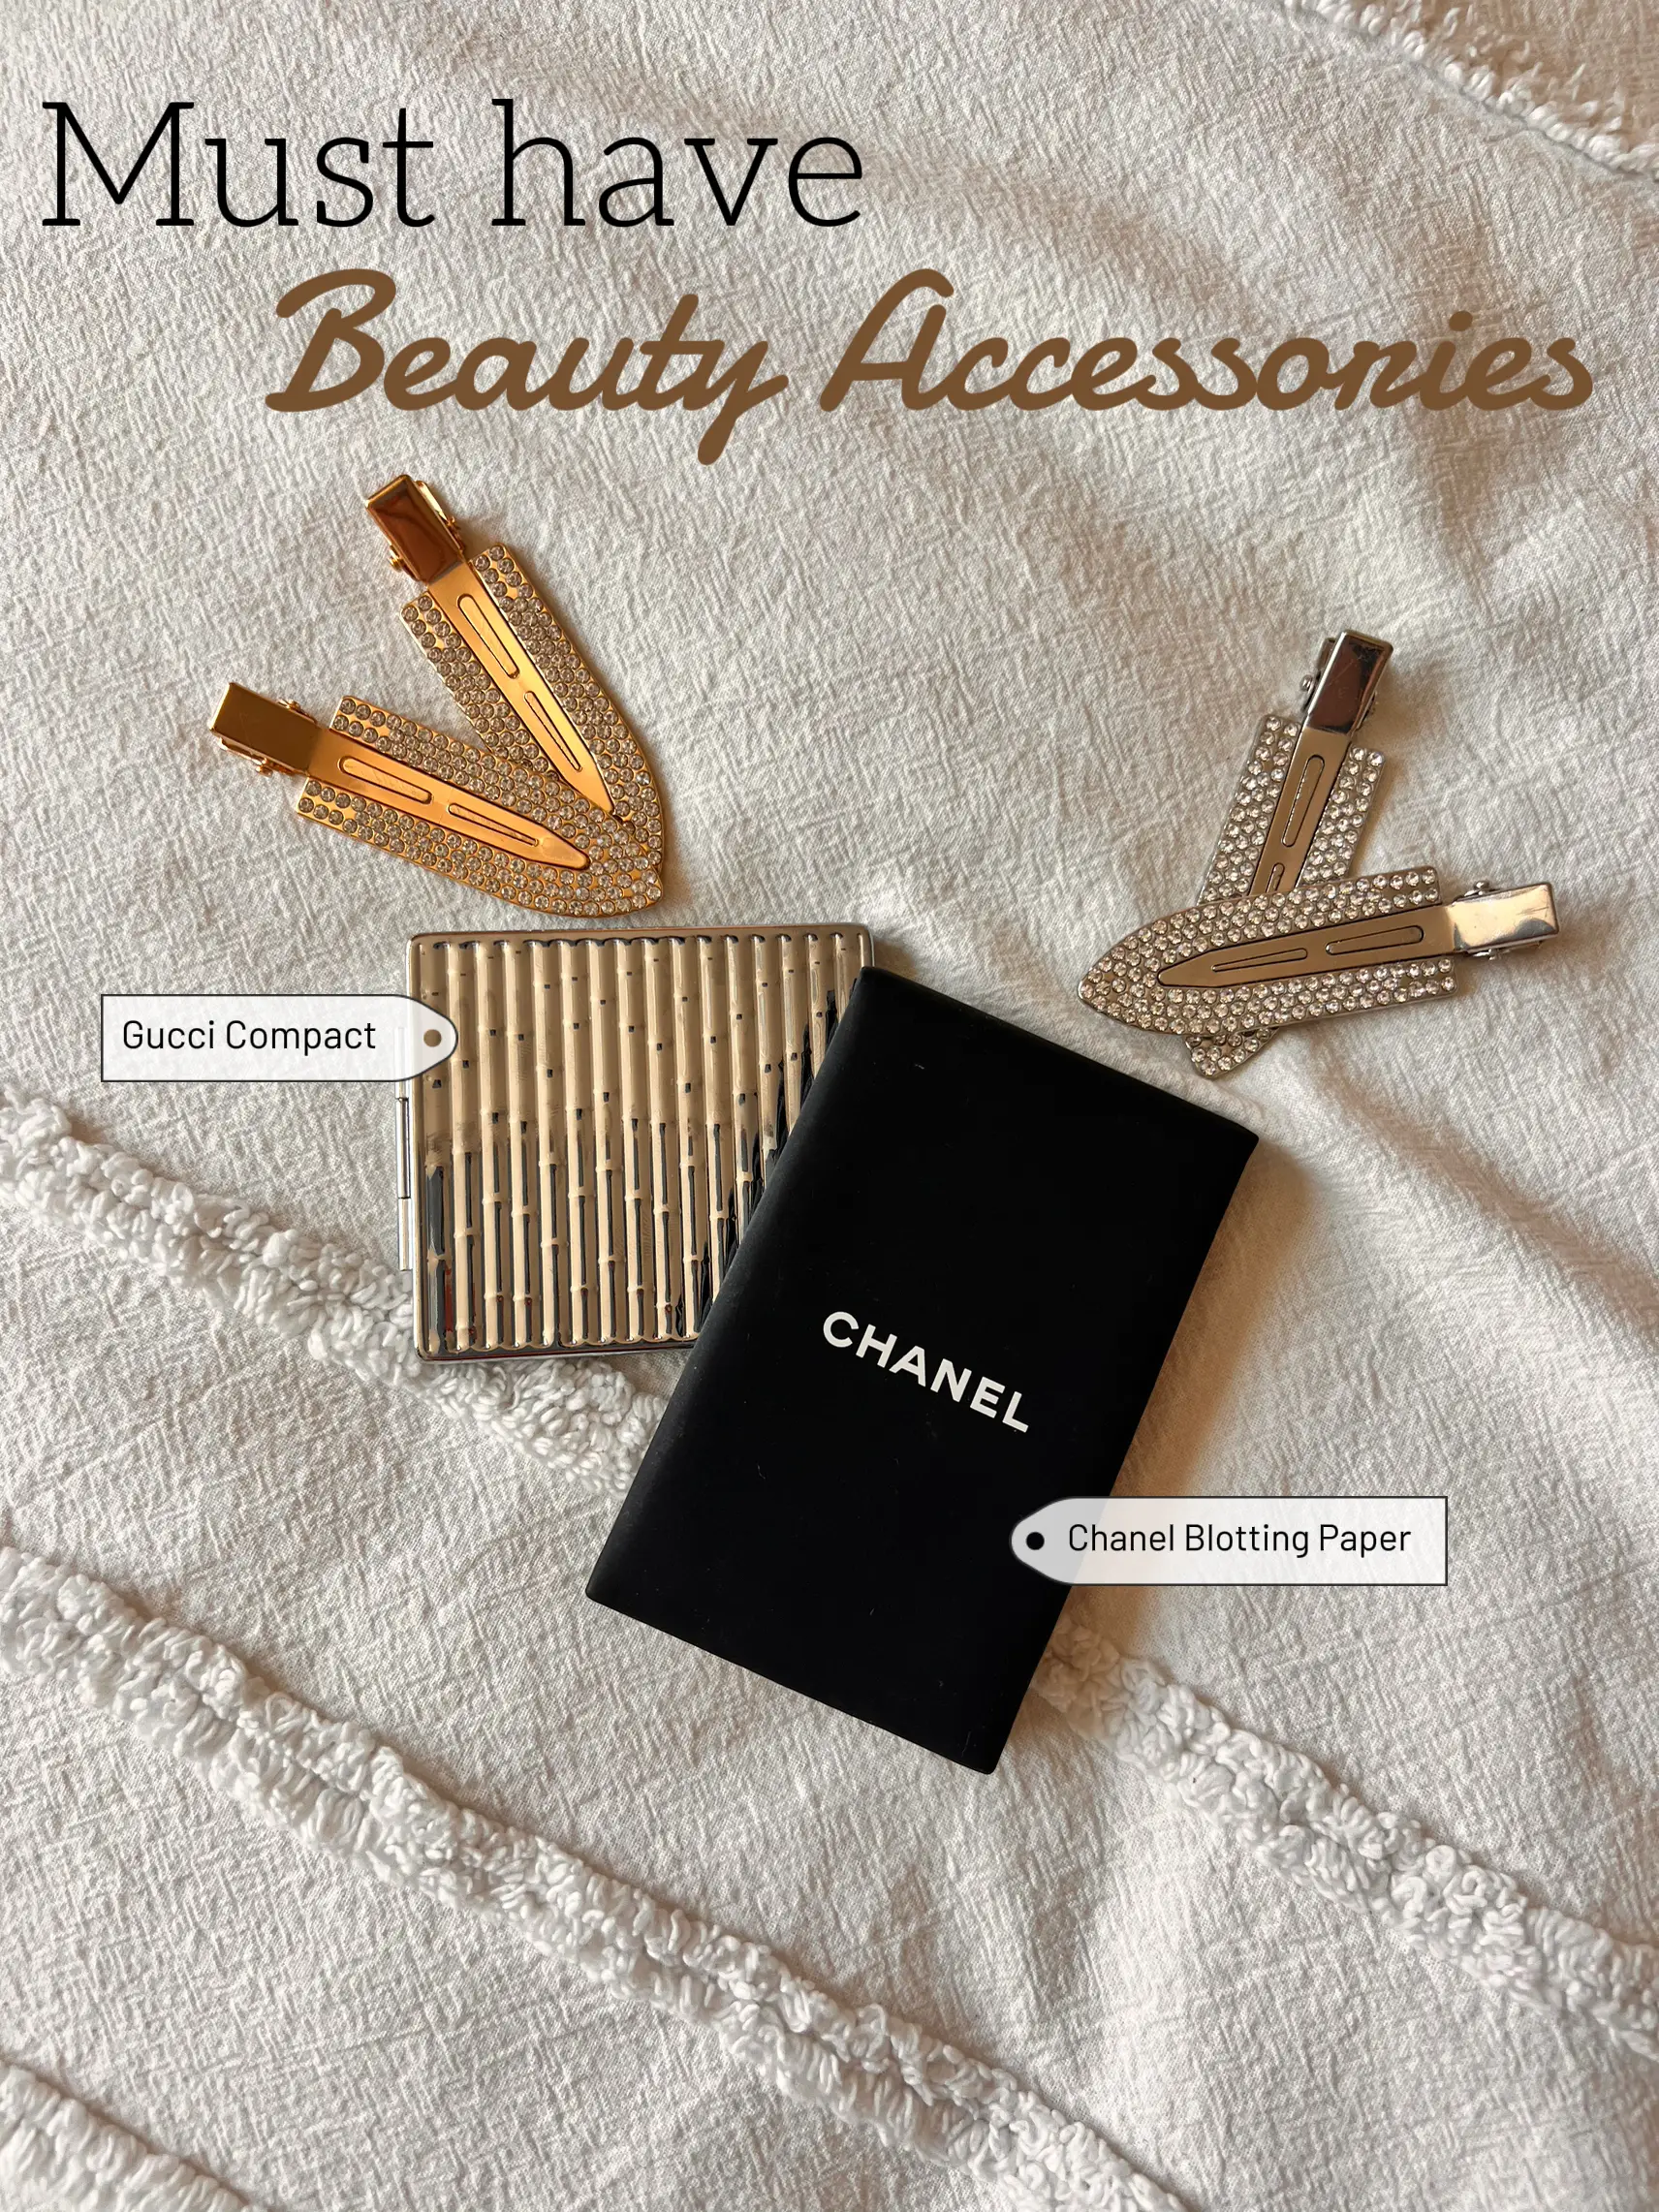 Beauty accessories you need!💌, Gallery posted by JULIE